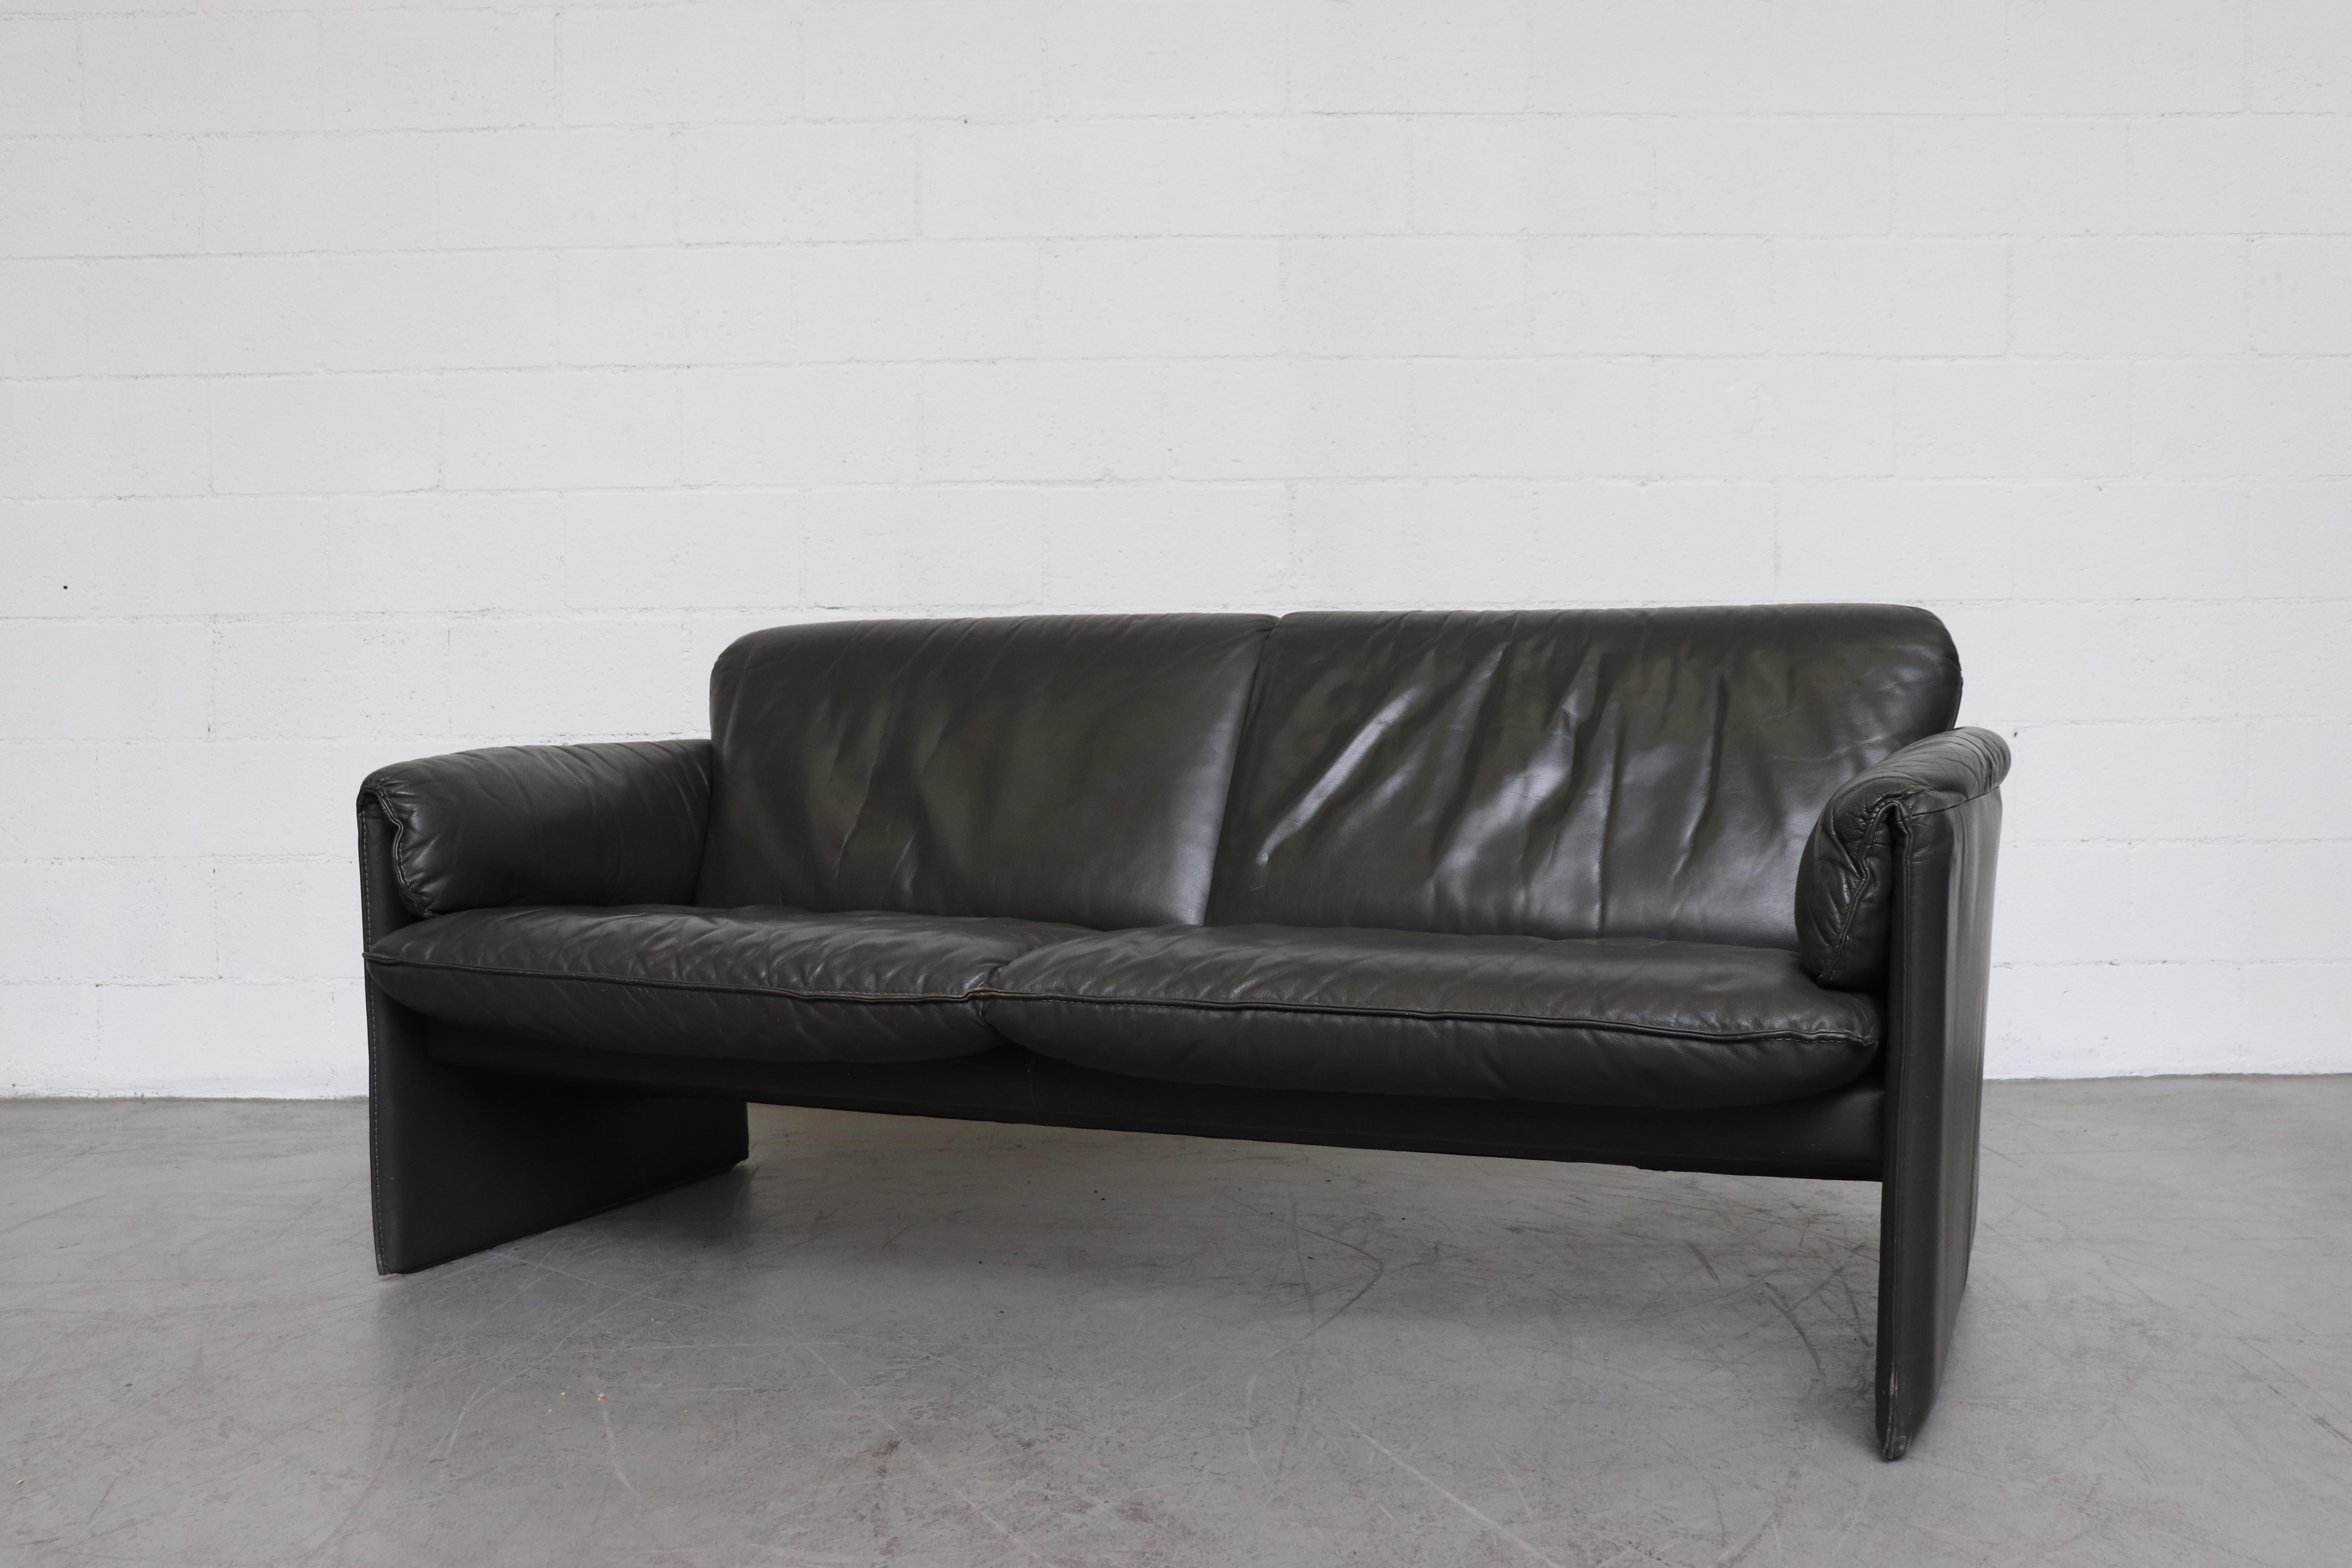 Charcoal grey leather 'Bora Bora' 2-seat sofa by Leolux. In original condition with visible signs of wear consistent with its age and use, other colors in the same style available.